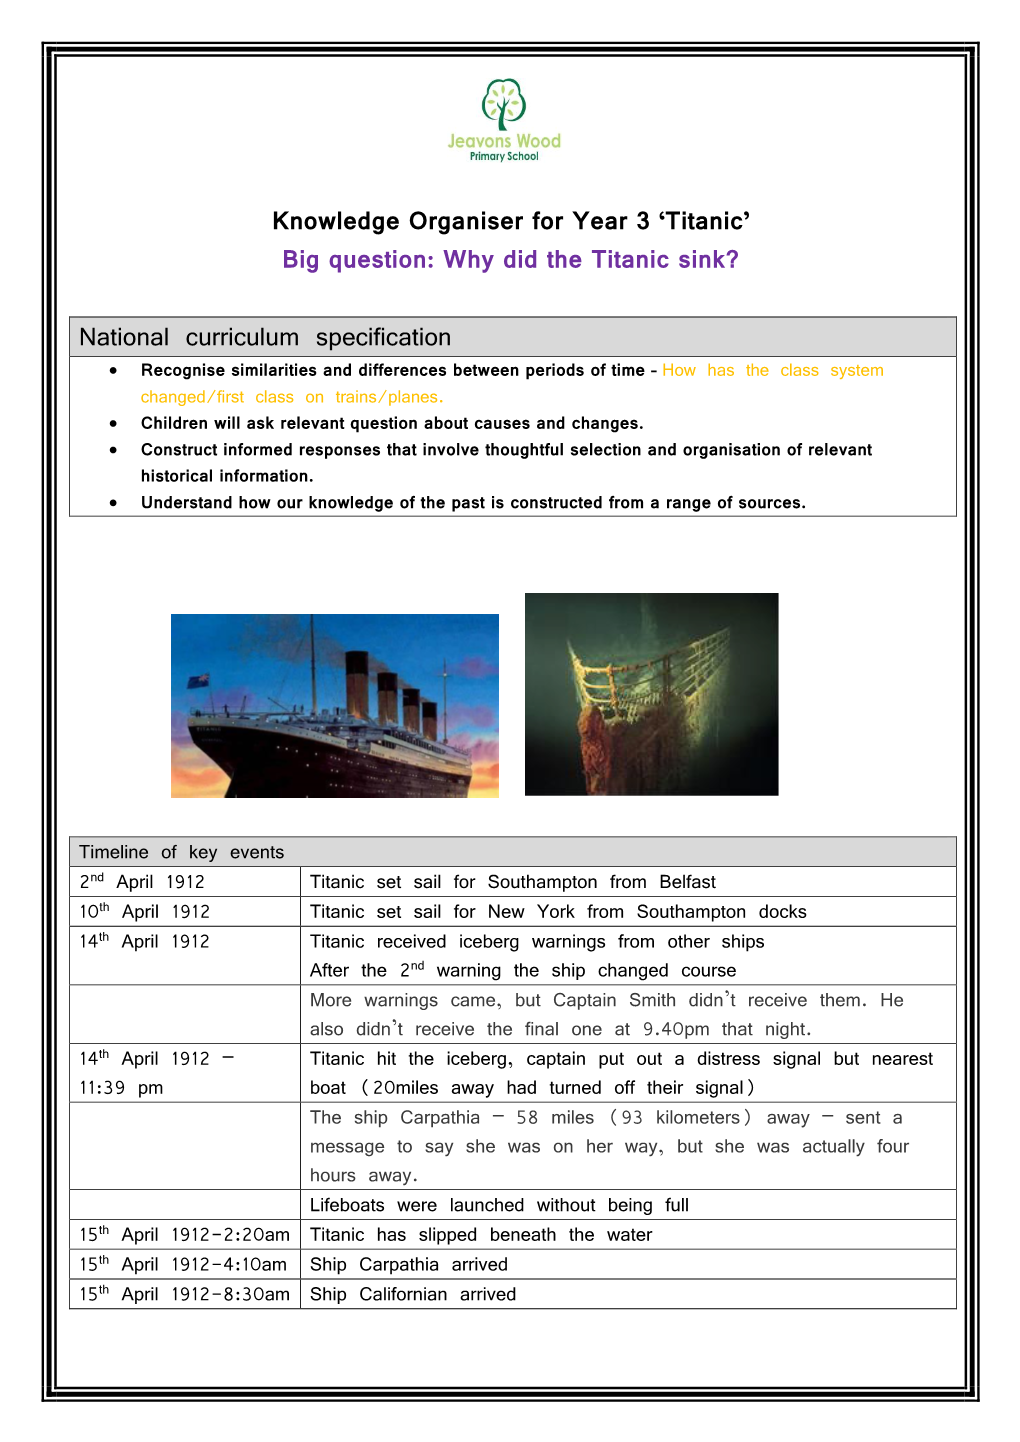 Knowledge Organiser for Year 3 'Titanic' Big Question: Why Did The